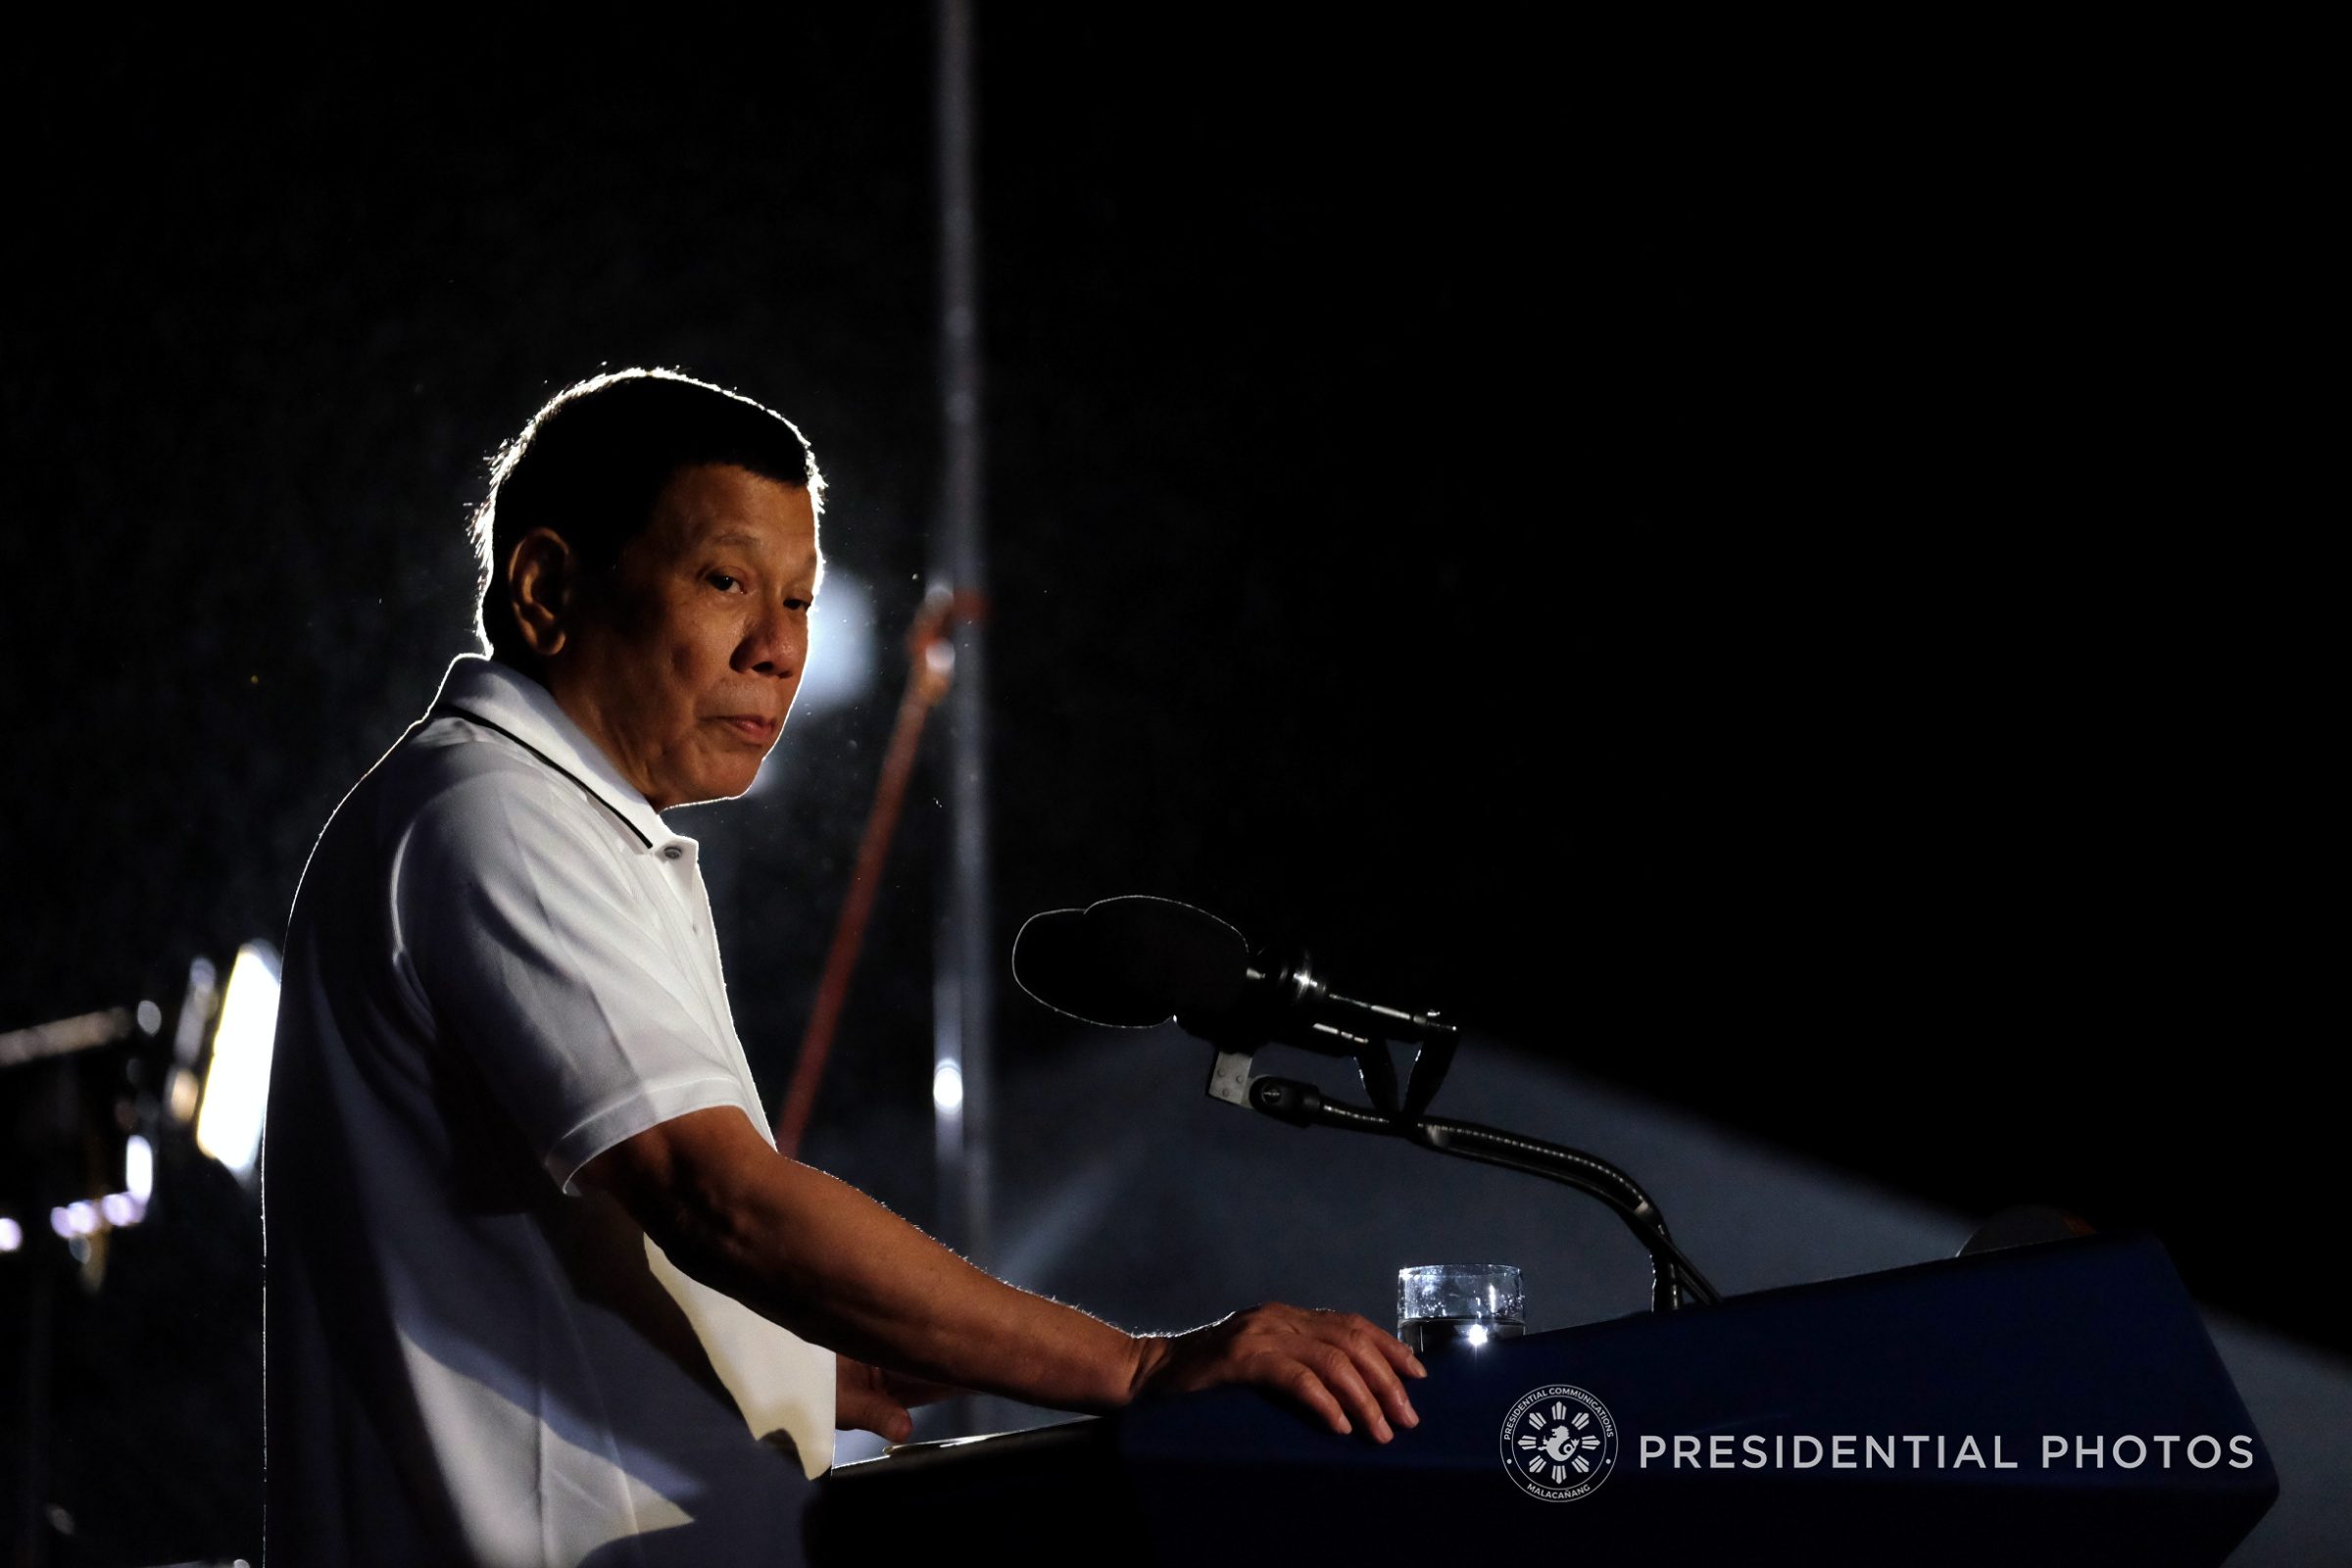 Duterte: Running a democratic country not an easy task